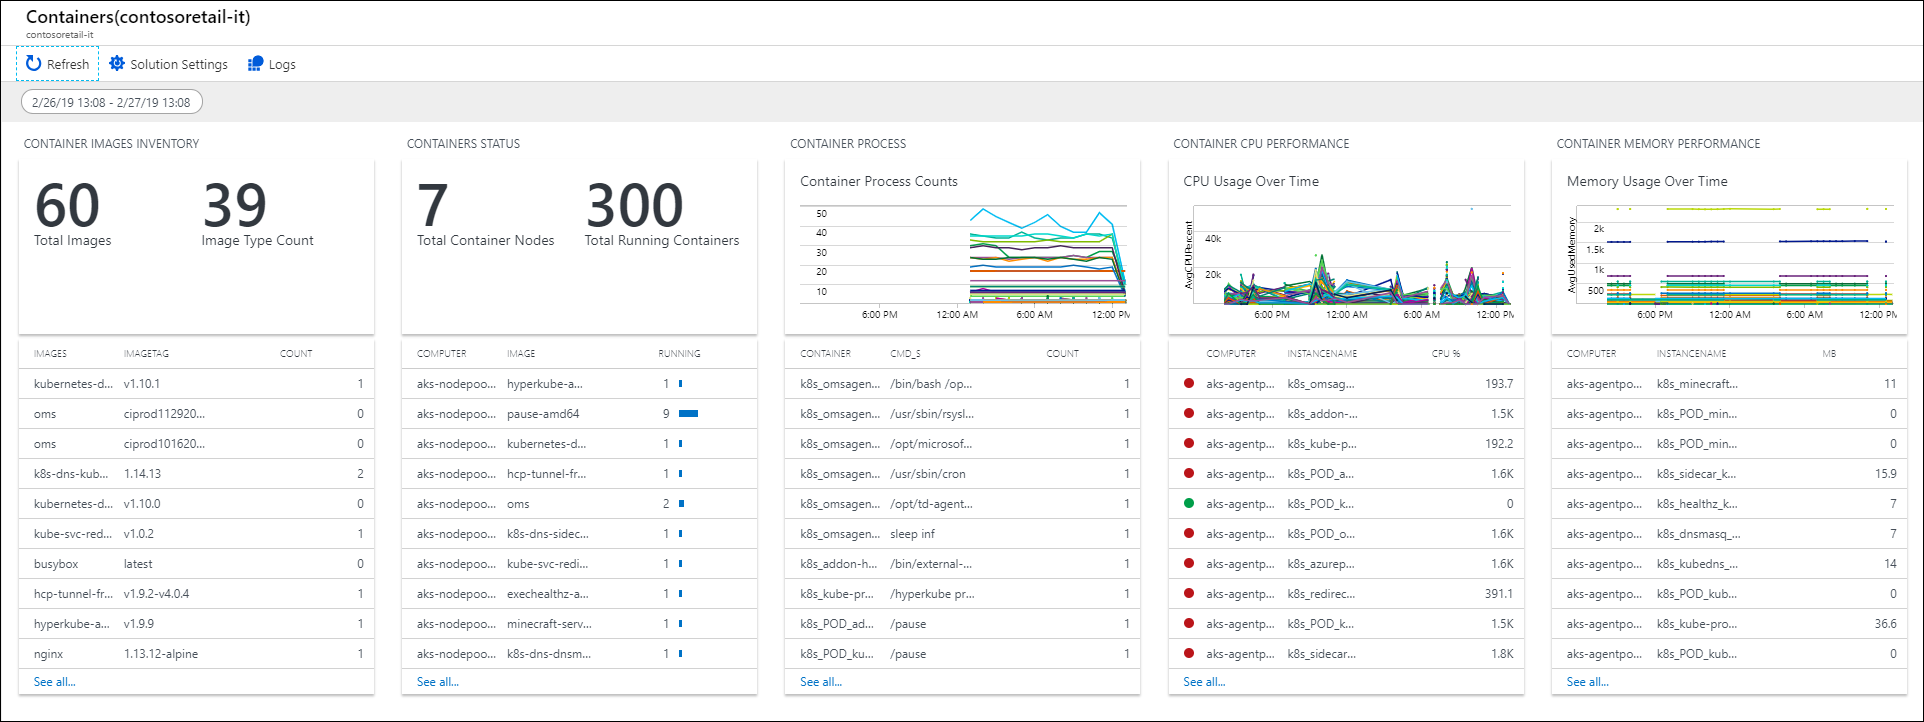 Screenshot that shows a dashboard to view the collected data, which includes the status, process, performance, and images inventory of containers.